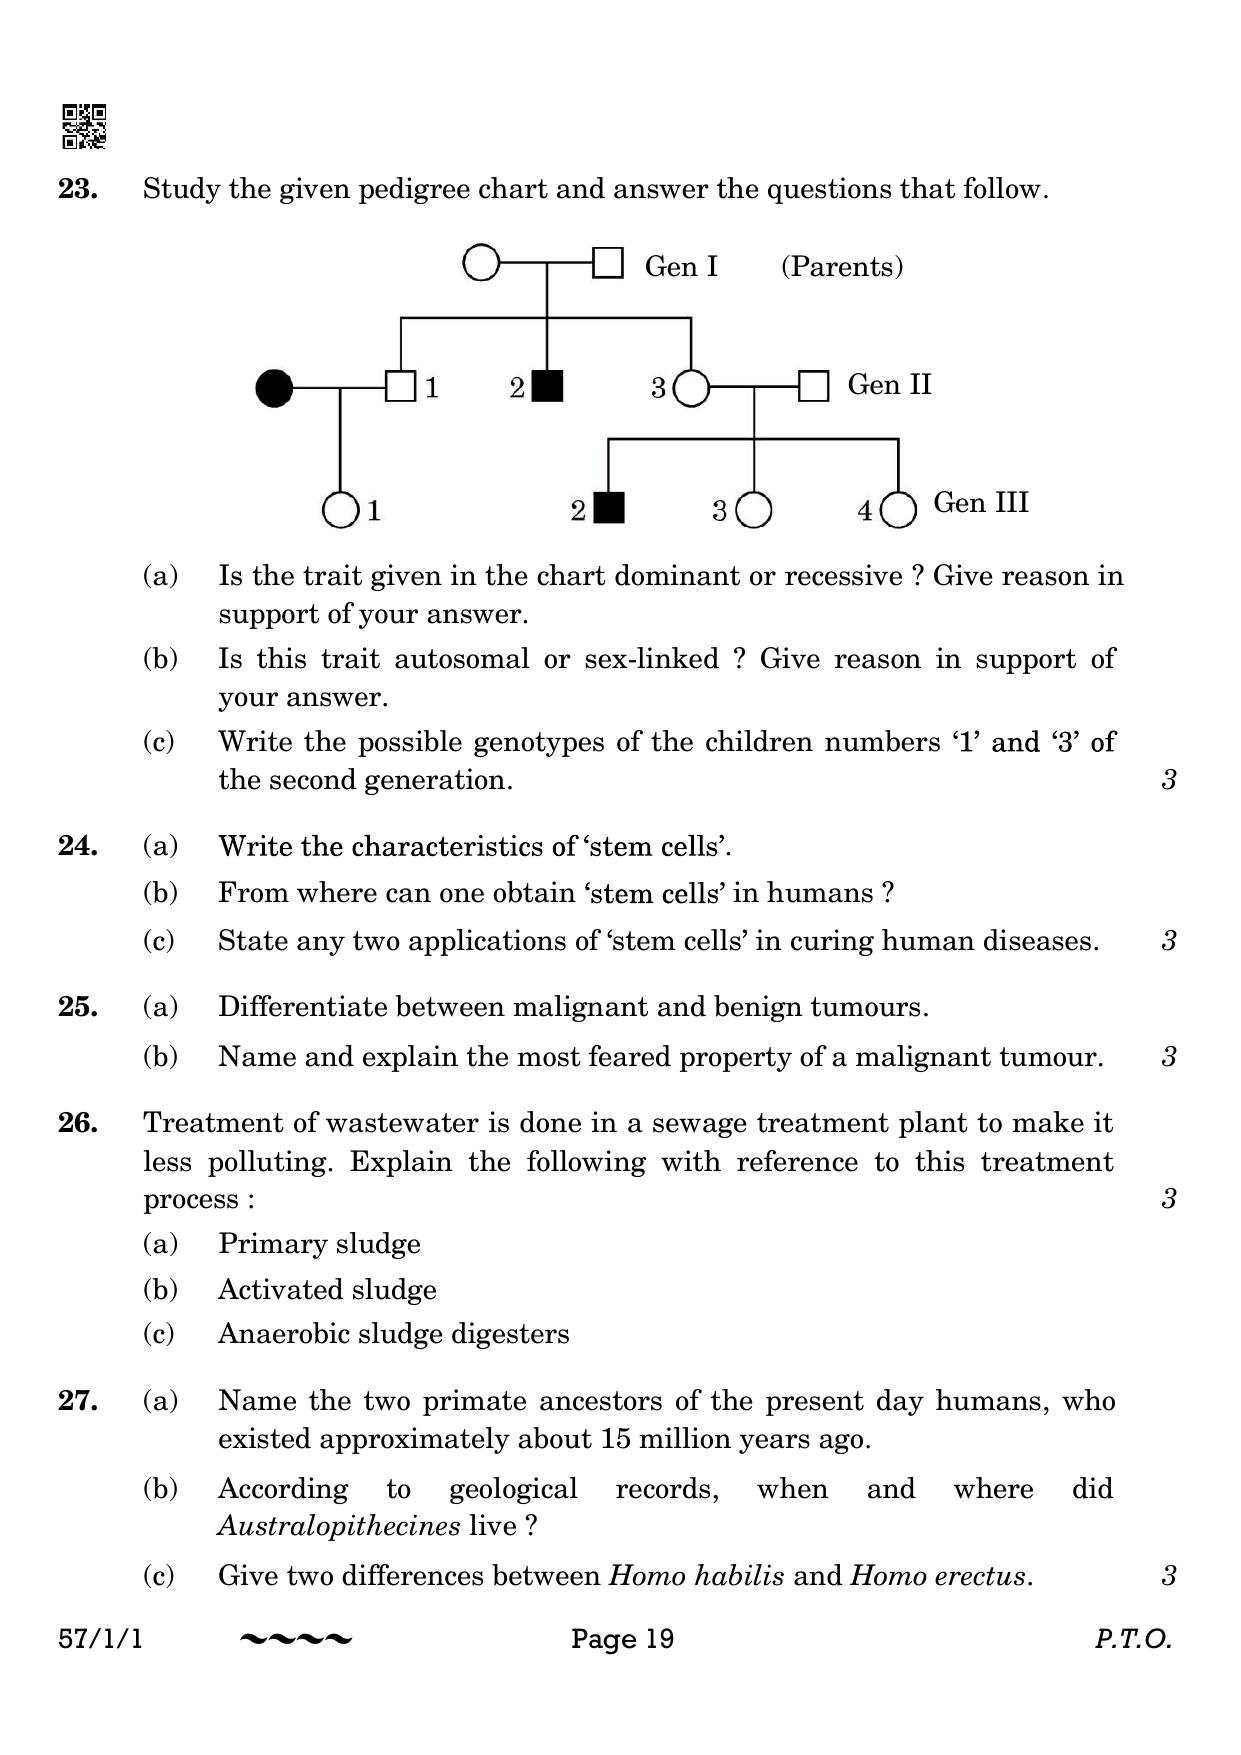 CBSE Class 12 57-1-1 Biology 2023 Question Paper - Page 19